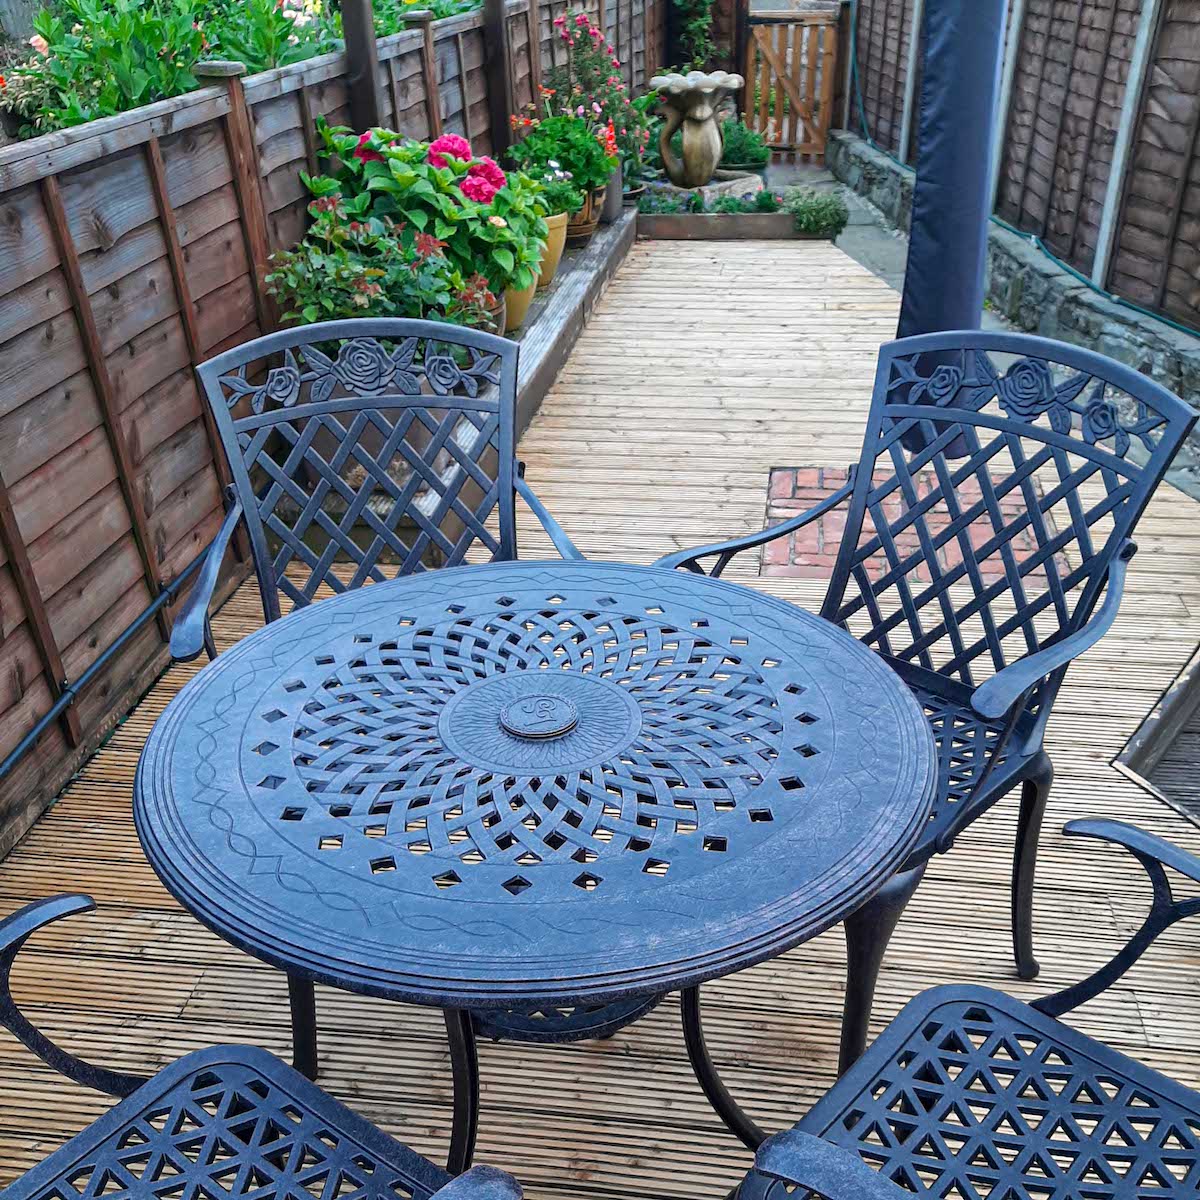 Why purchase a Garden Bistro Table?